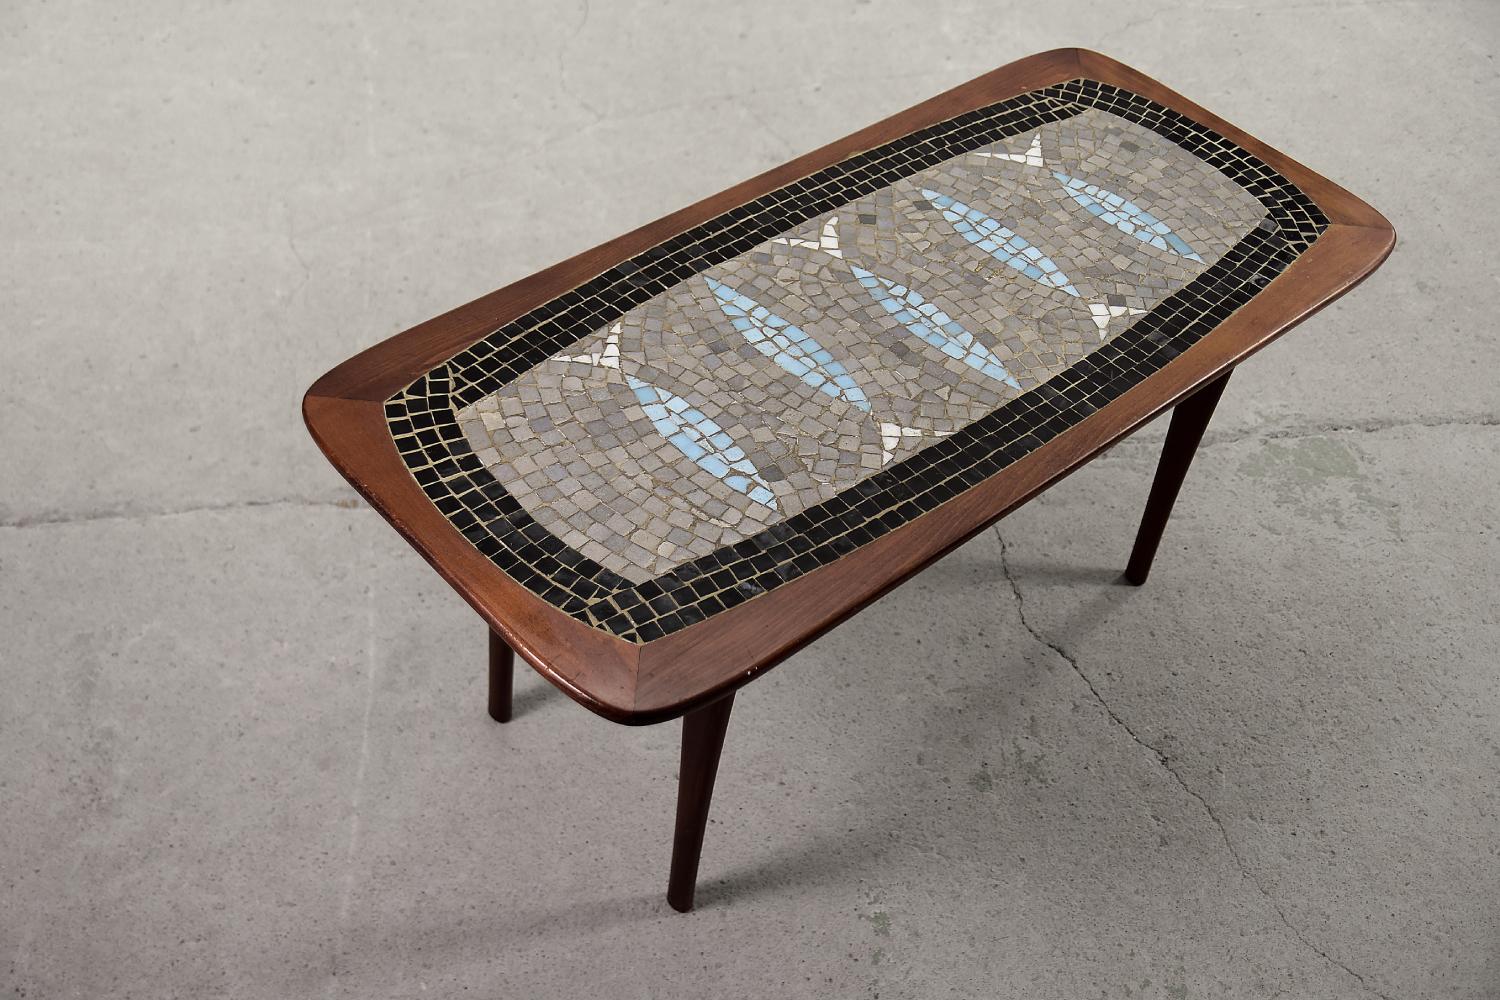 Vintage Scandinavian Modern Wood Coffee Table with Colorful Ceramic Mosaic For Sale 3